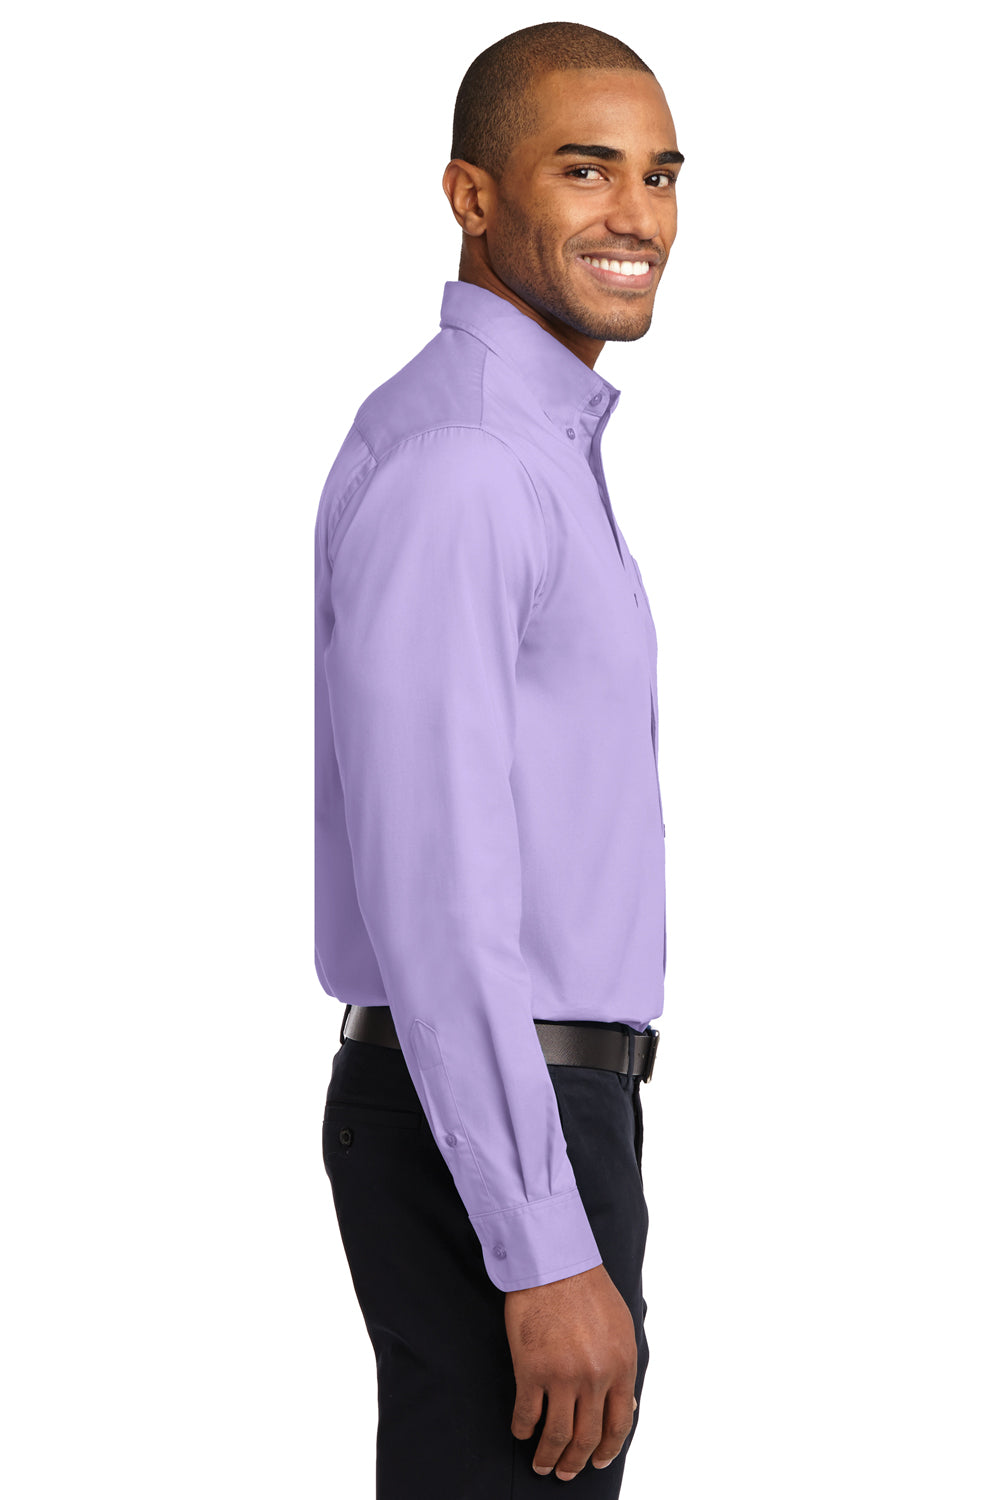 Port Authority S608/TLS608/S608ES Mens Easy Care Wrinkle Resistant Long Sleeve Button Down Shirt w/ Pocket Bright Lavender Purple Side